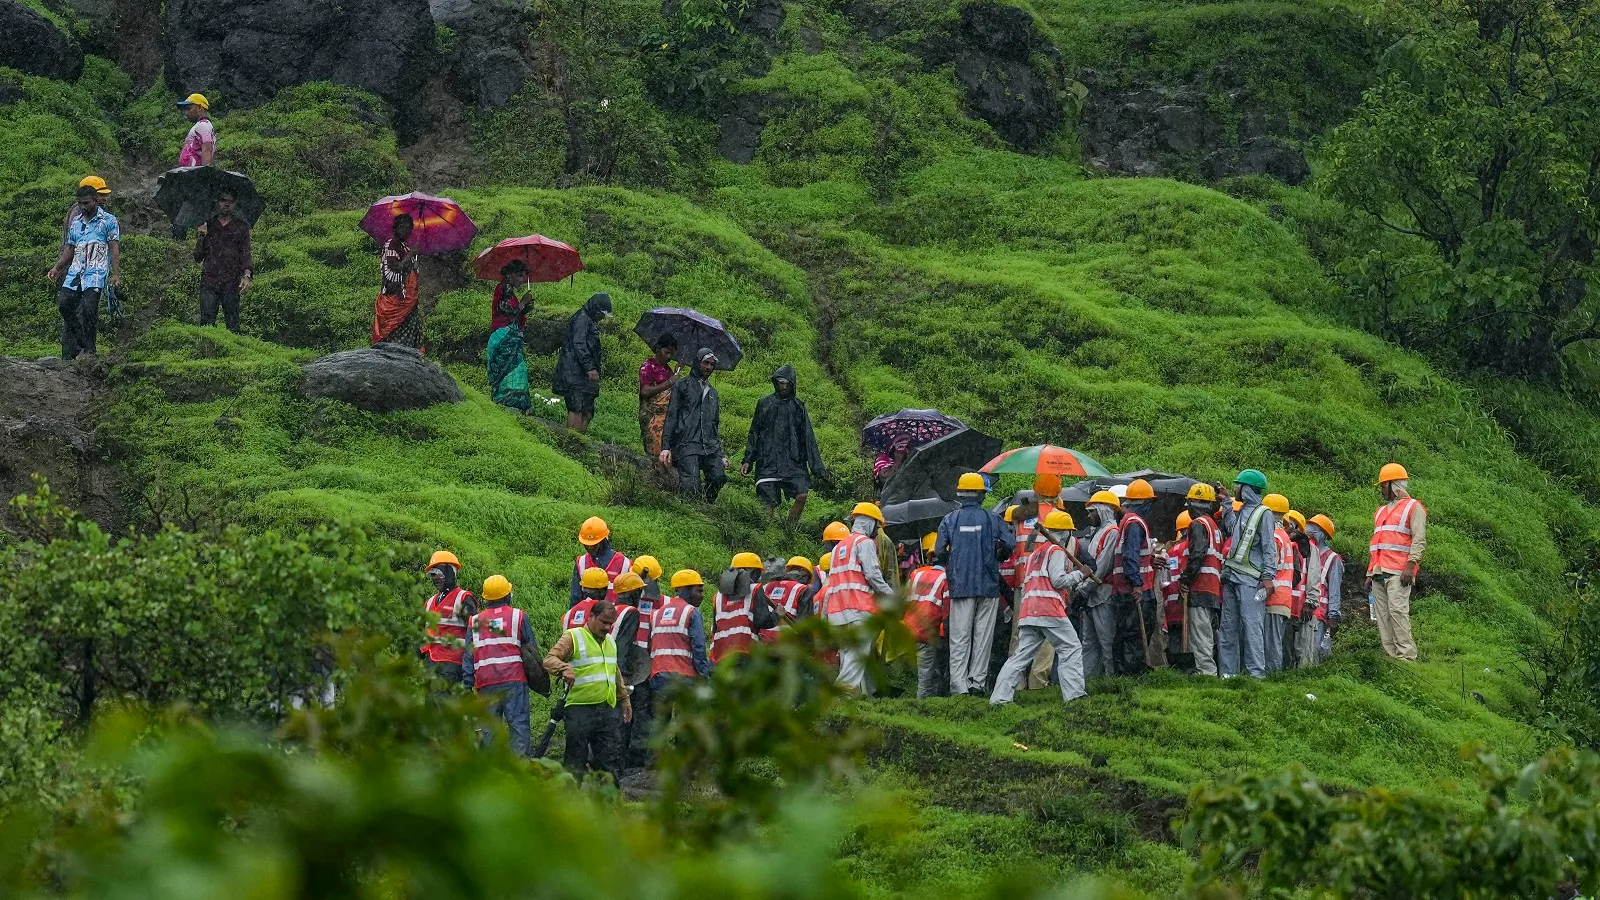 Search and rescue operation underway after a landslide at Irshalwadi village, in Raigad district